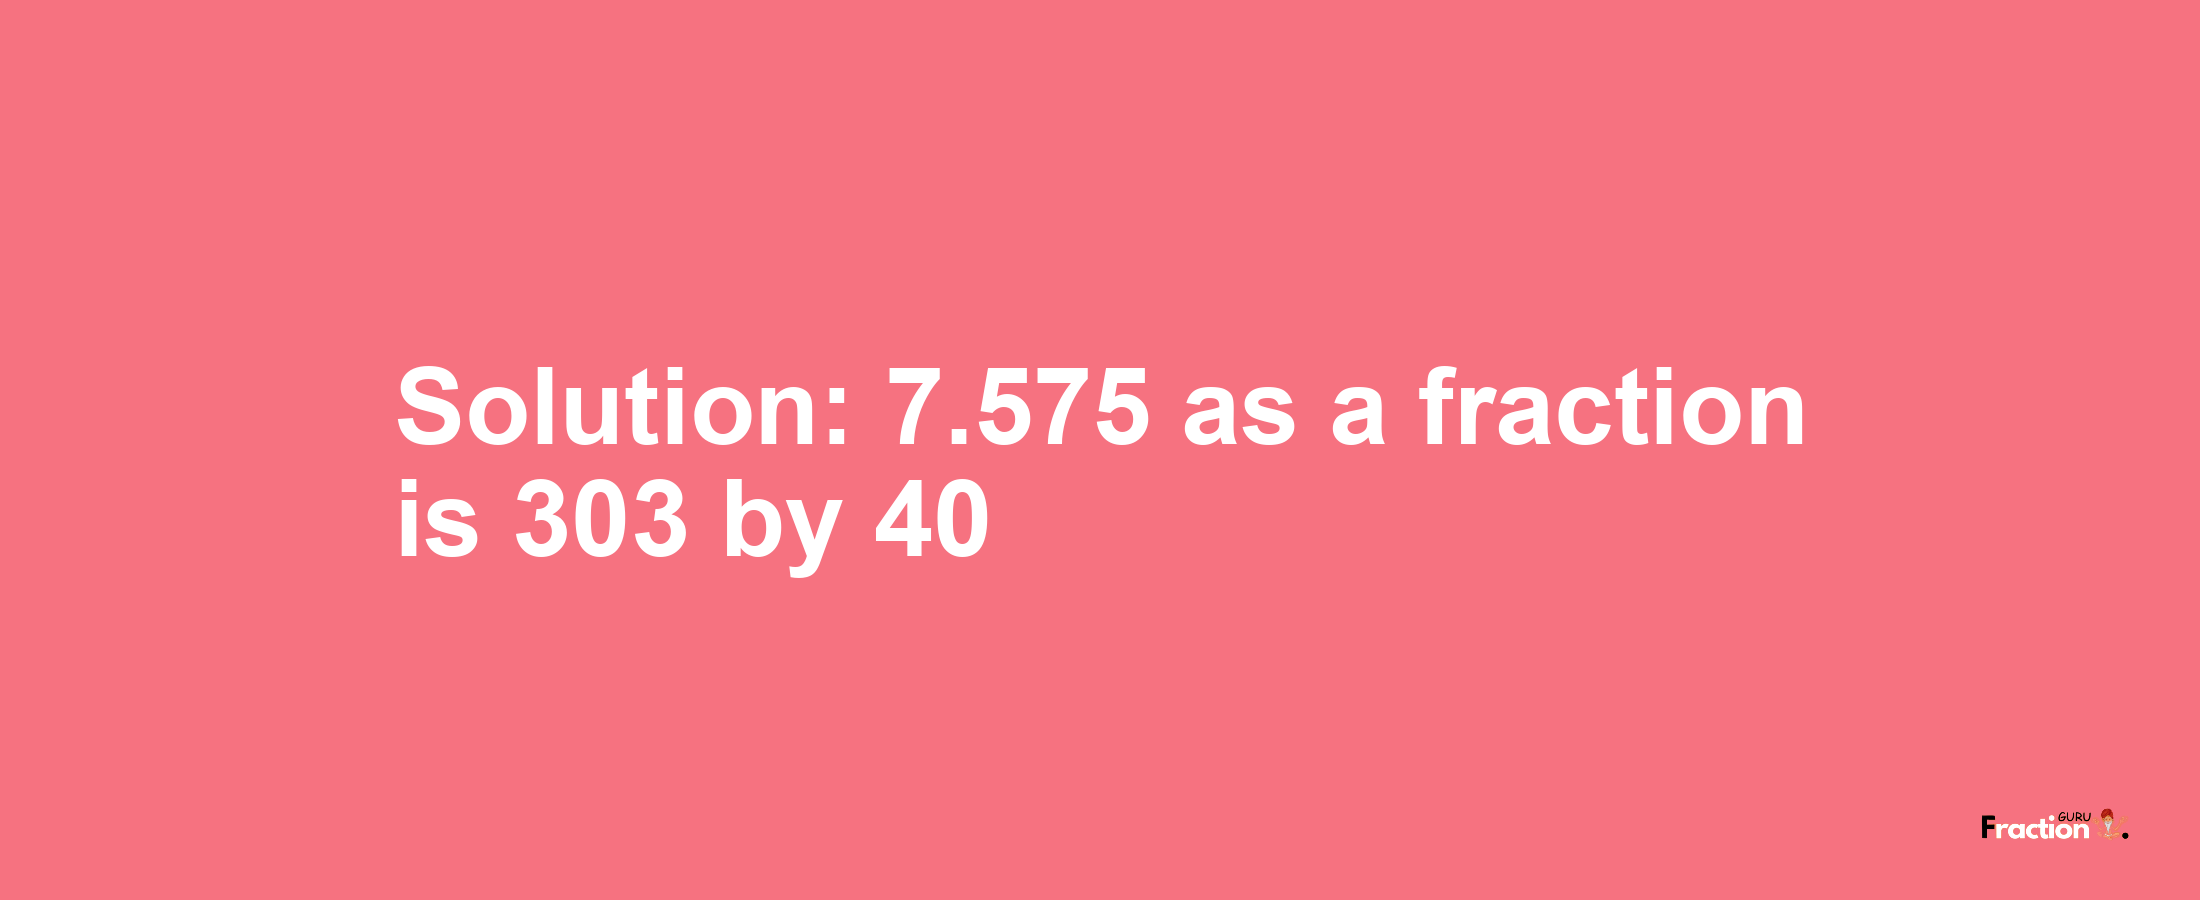 Solution:7.575 as a fraction is 303/40